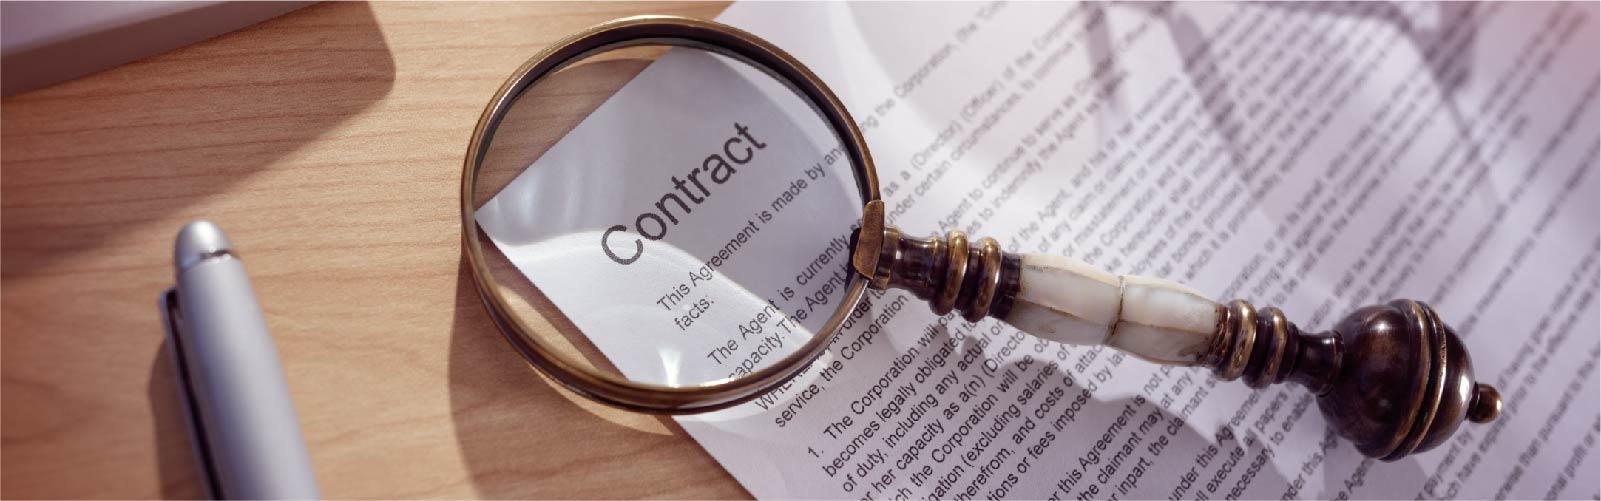 legal contractors agreements in ibiza